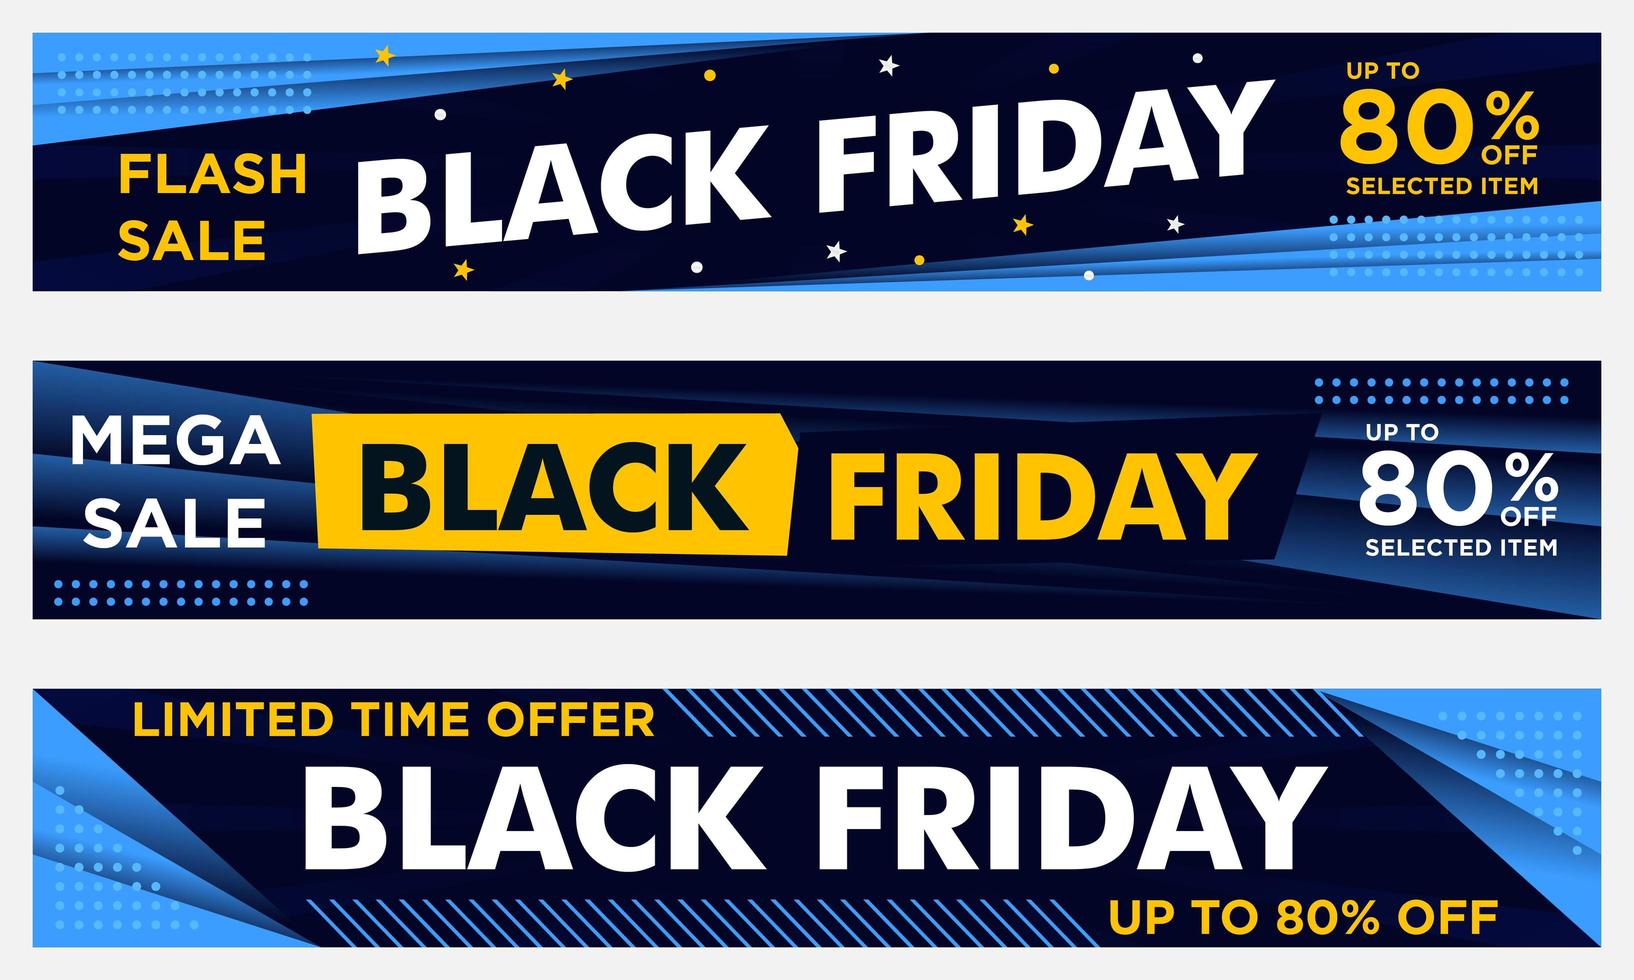 Black Friday horizontal event banners in yellow and blue vector